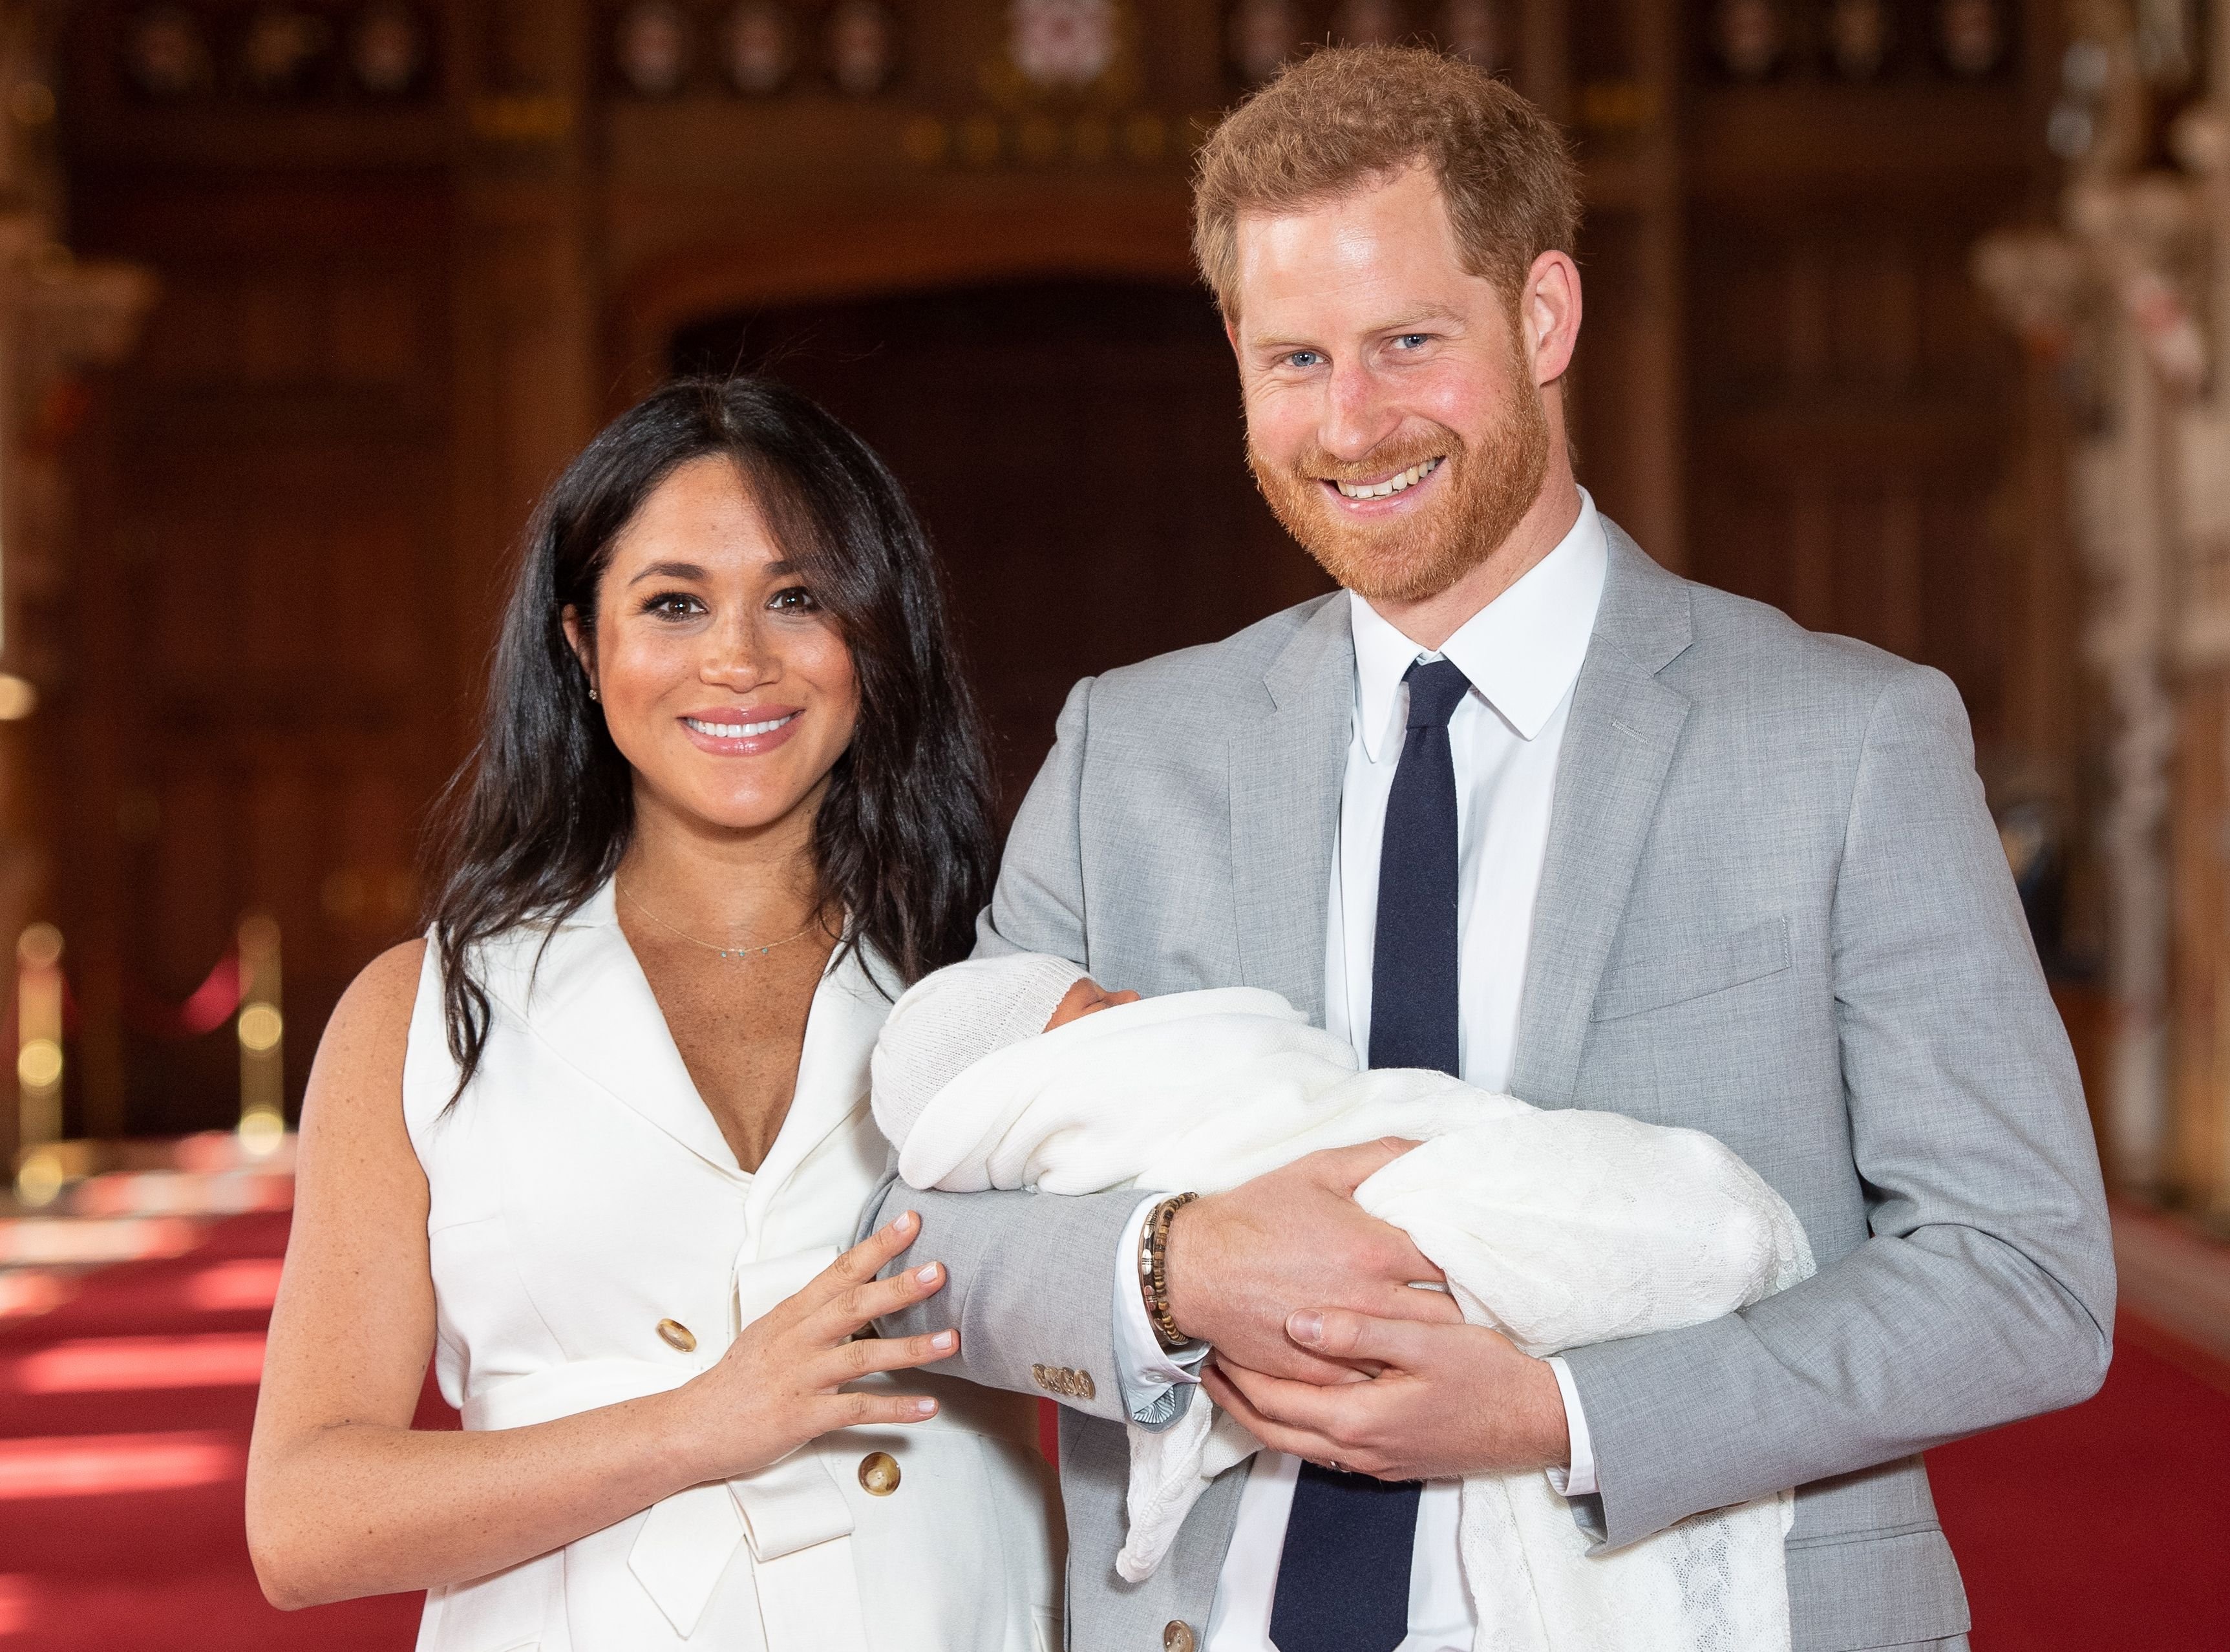 Meghan Markle and Prince Harry with their on Archie in London 2019. | Source: Getty Images